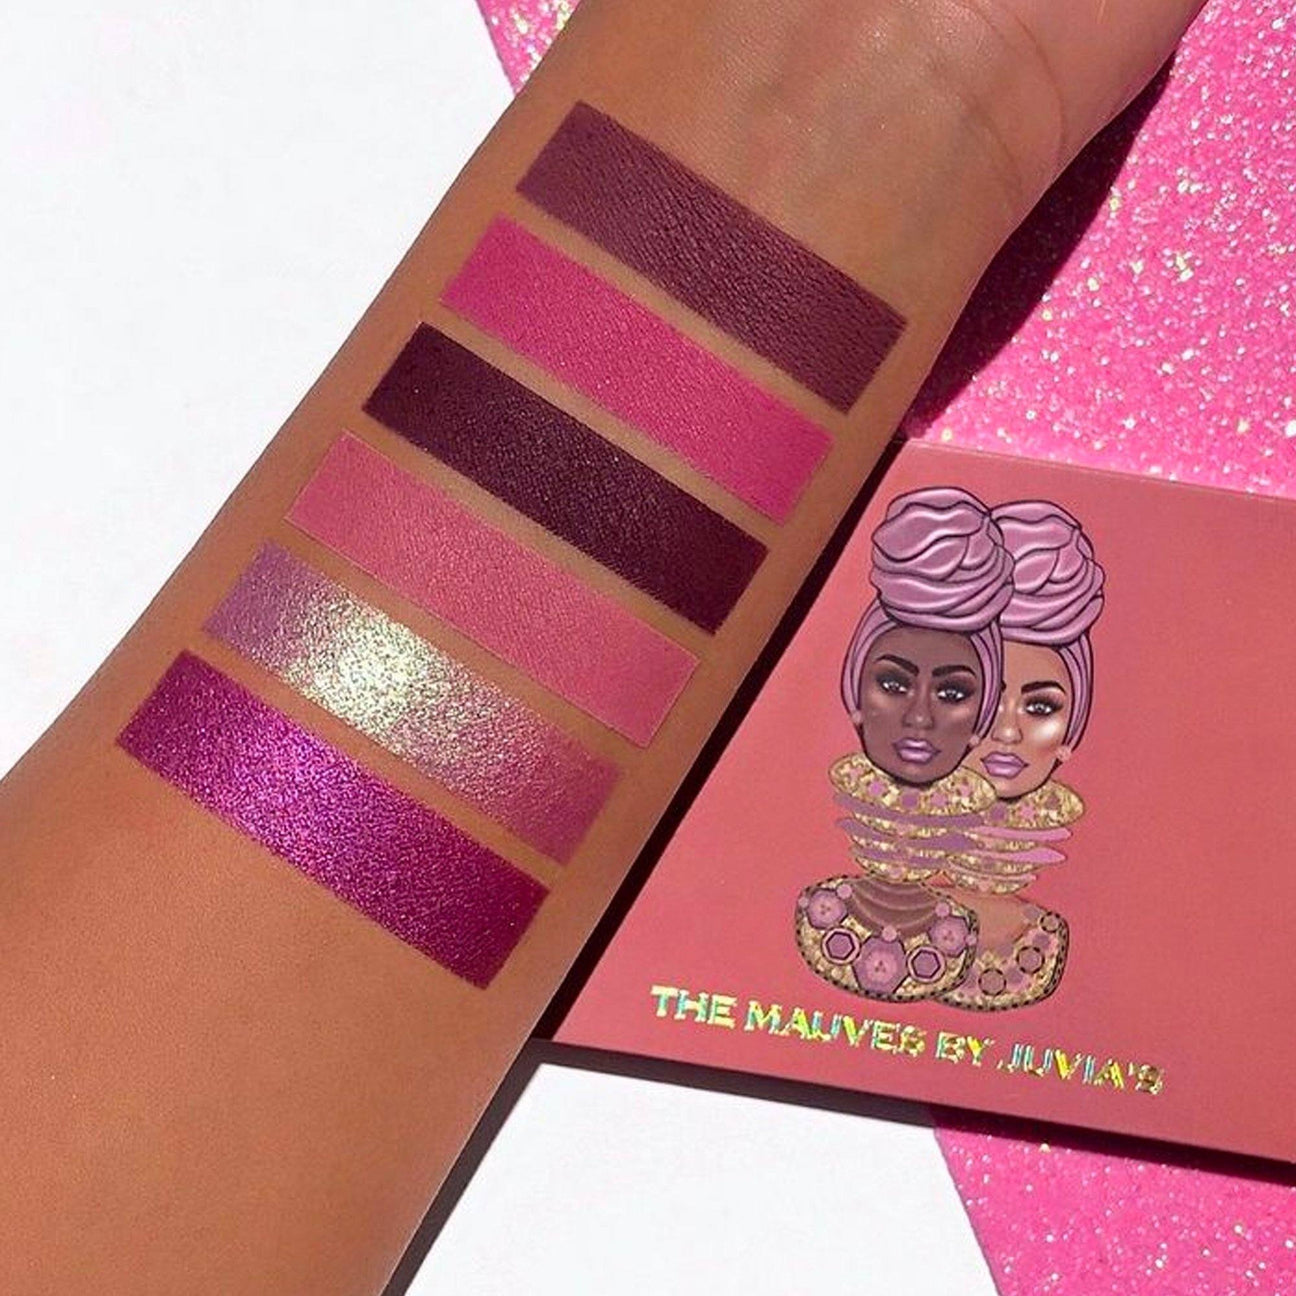 The Mauves Eyeshadow Palette